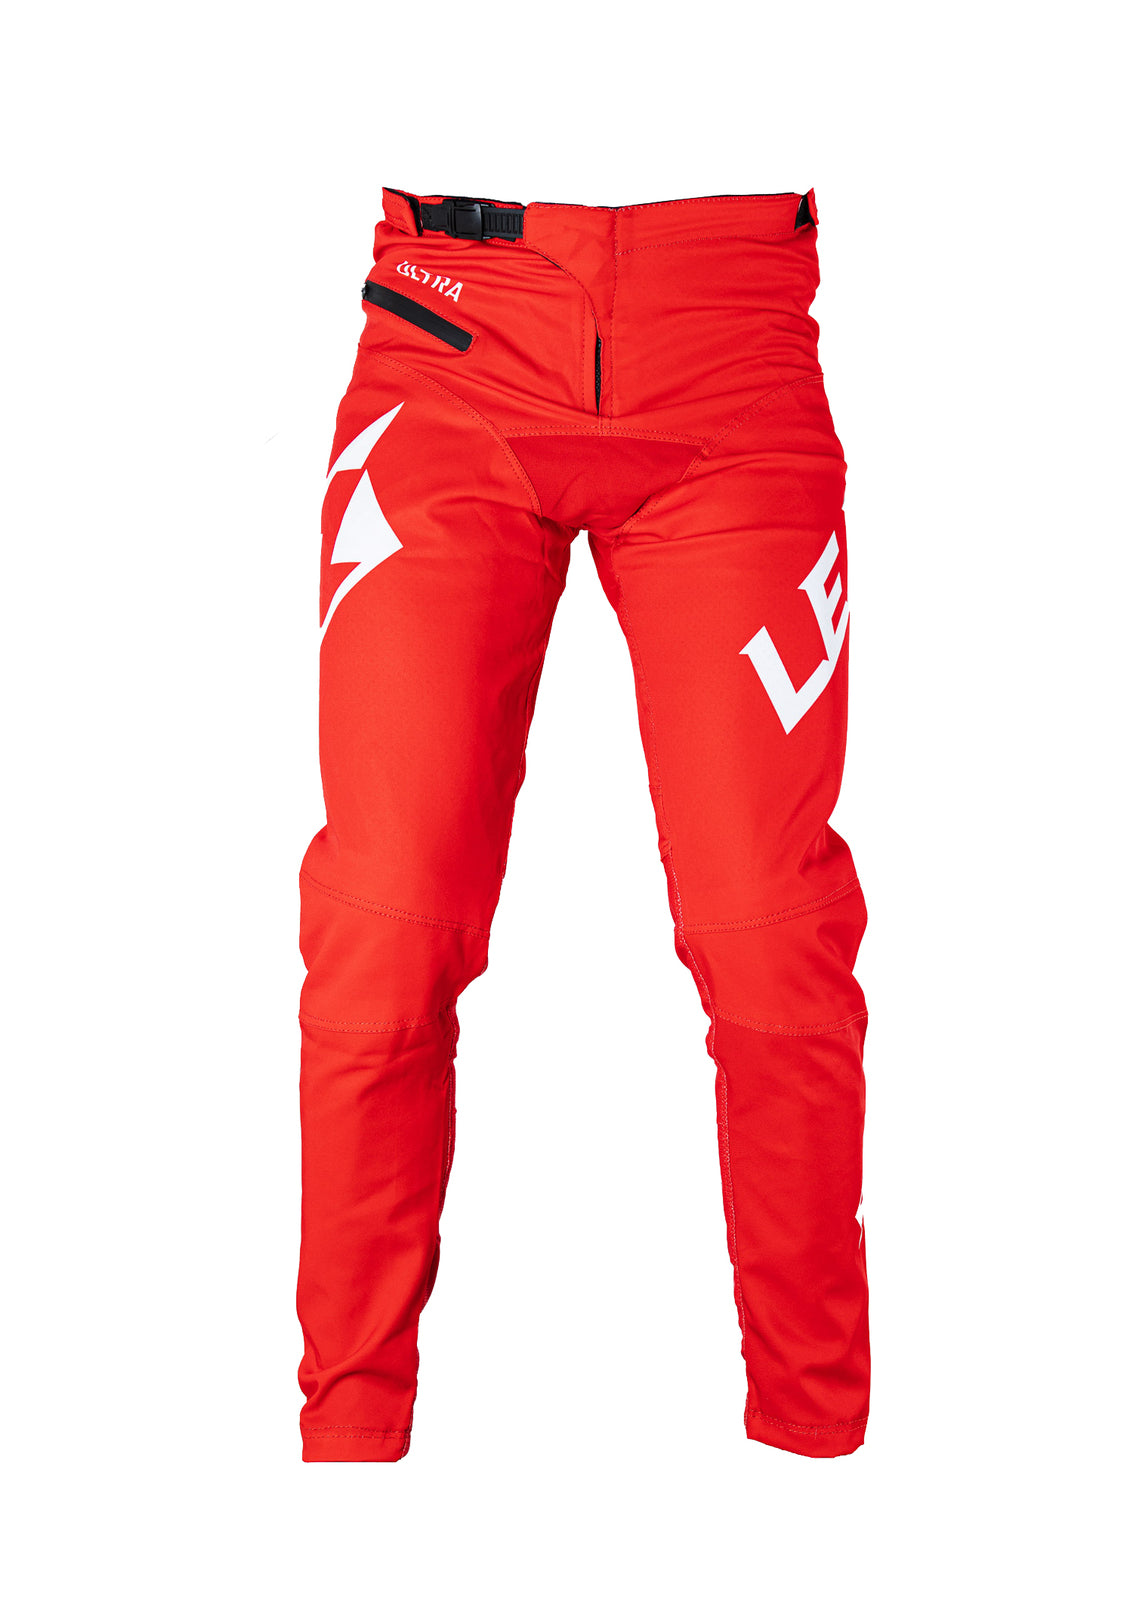 A pair of fitted Lead Ultra Youth Pants with a white logo on them, suitable for race wear and designed to reduce drag.